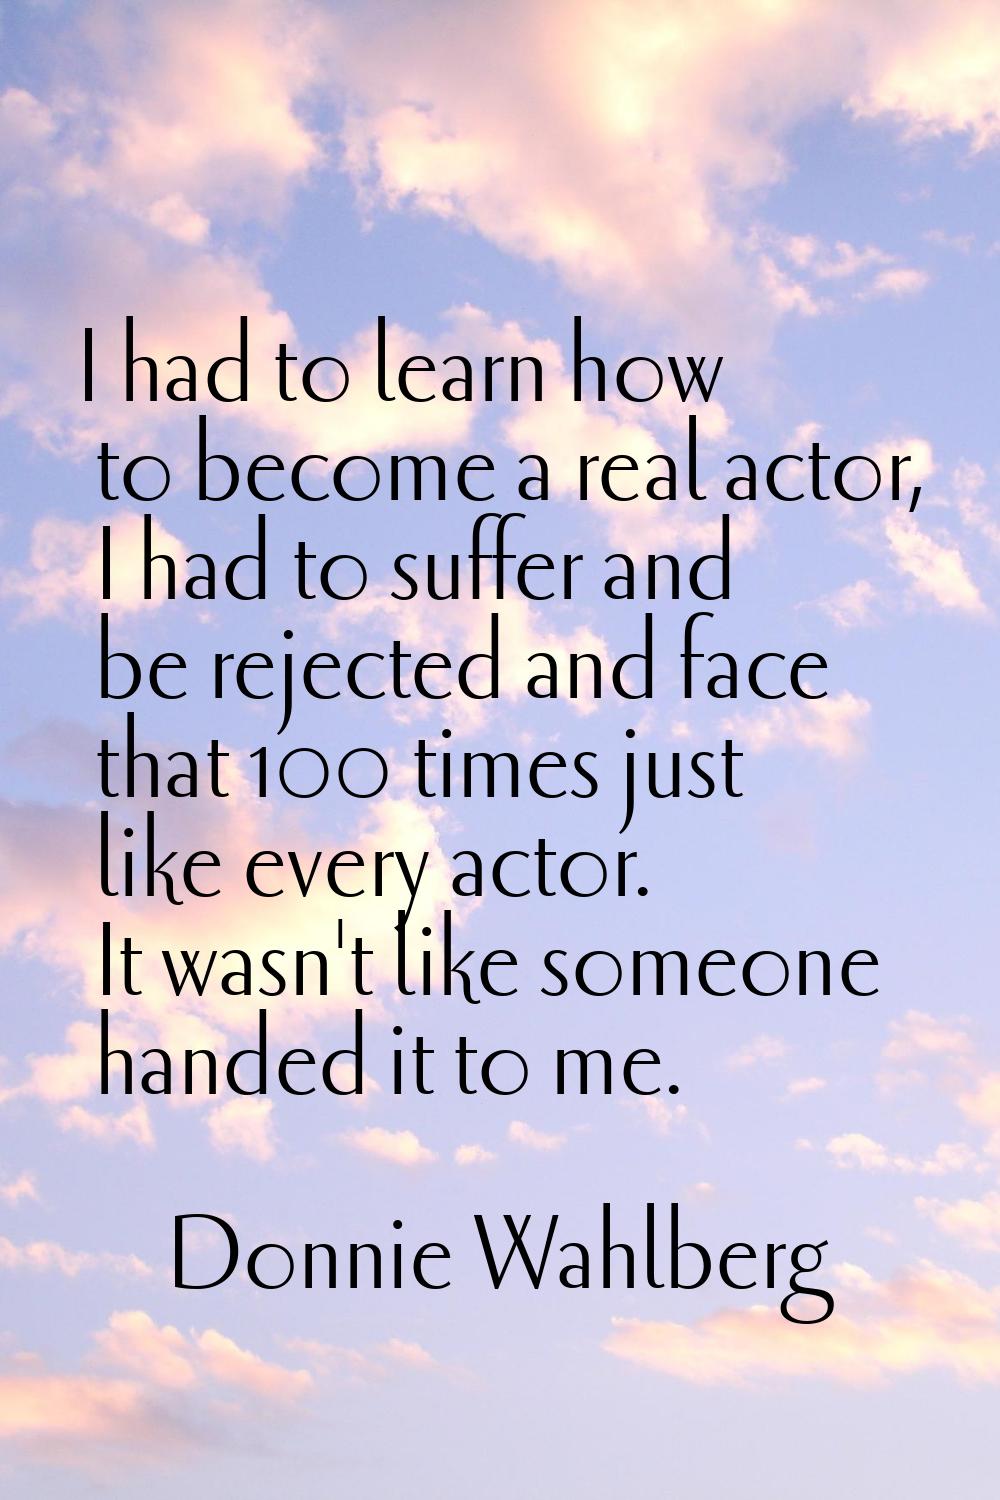 I had to learn how to become a real actor, I had to suffer and be rejected and face that 100 times 